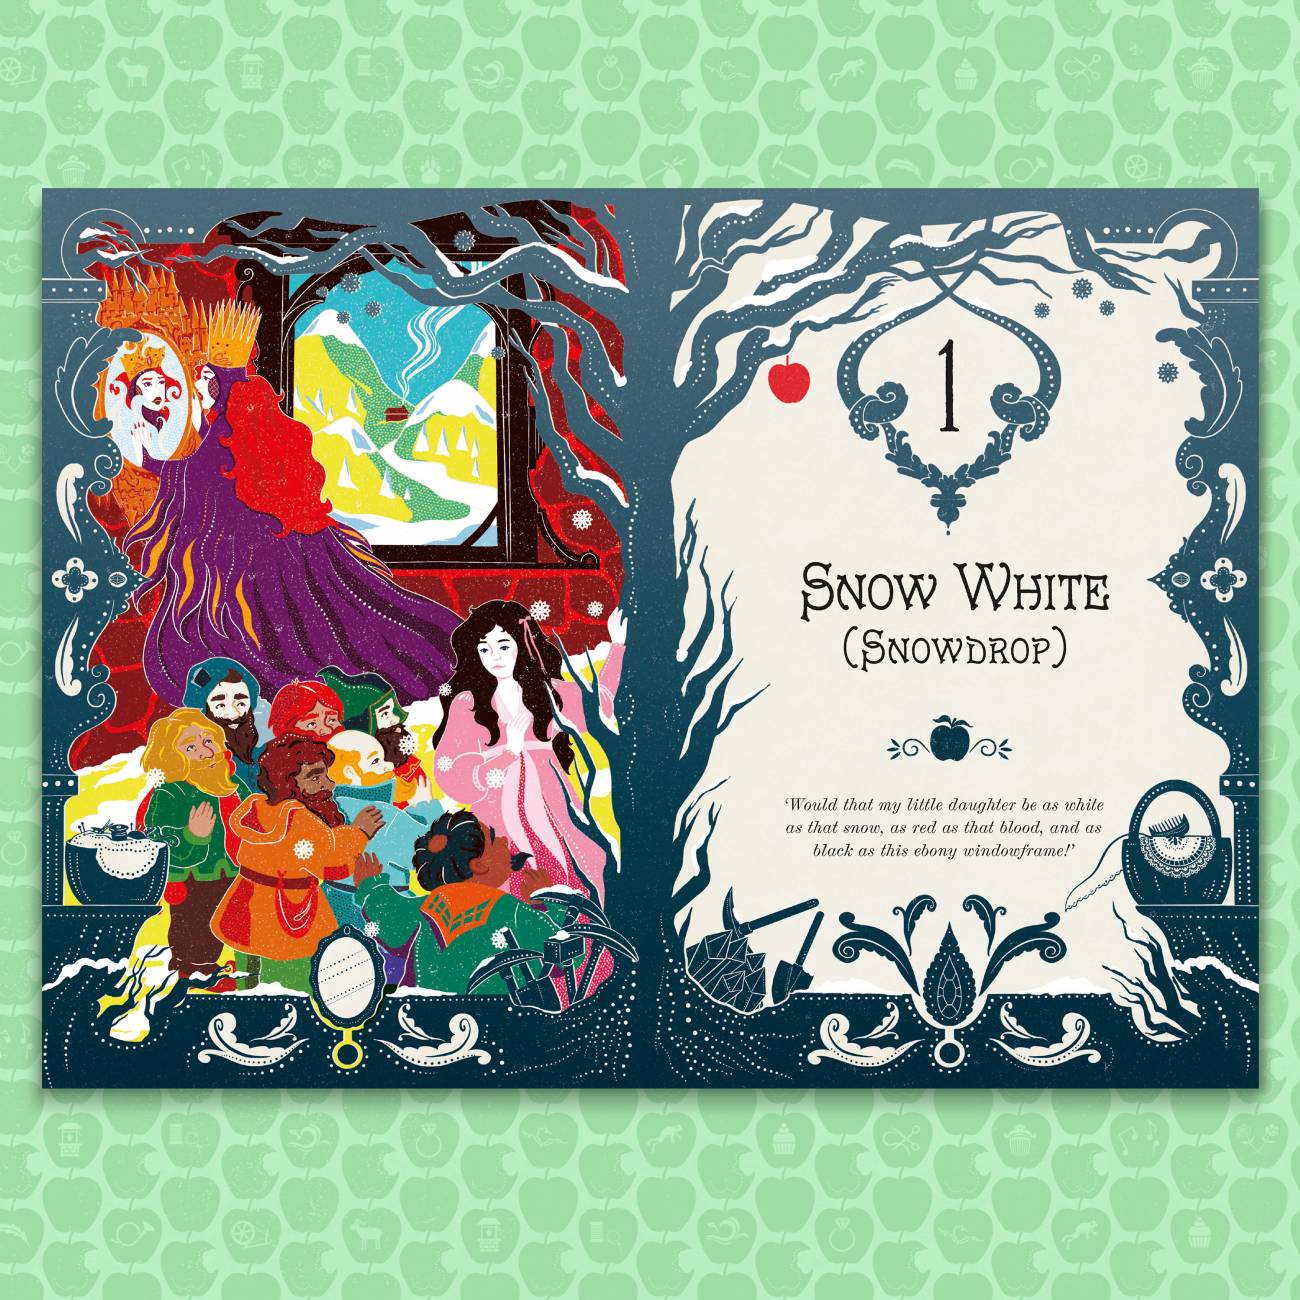 Snow White and Other Grimms' Fairy Tales (Minalima Edition): Illustrated with Interactive Elements (Illustrated with Interactive Elements)